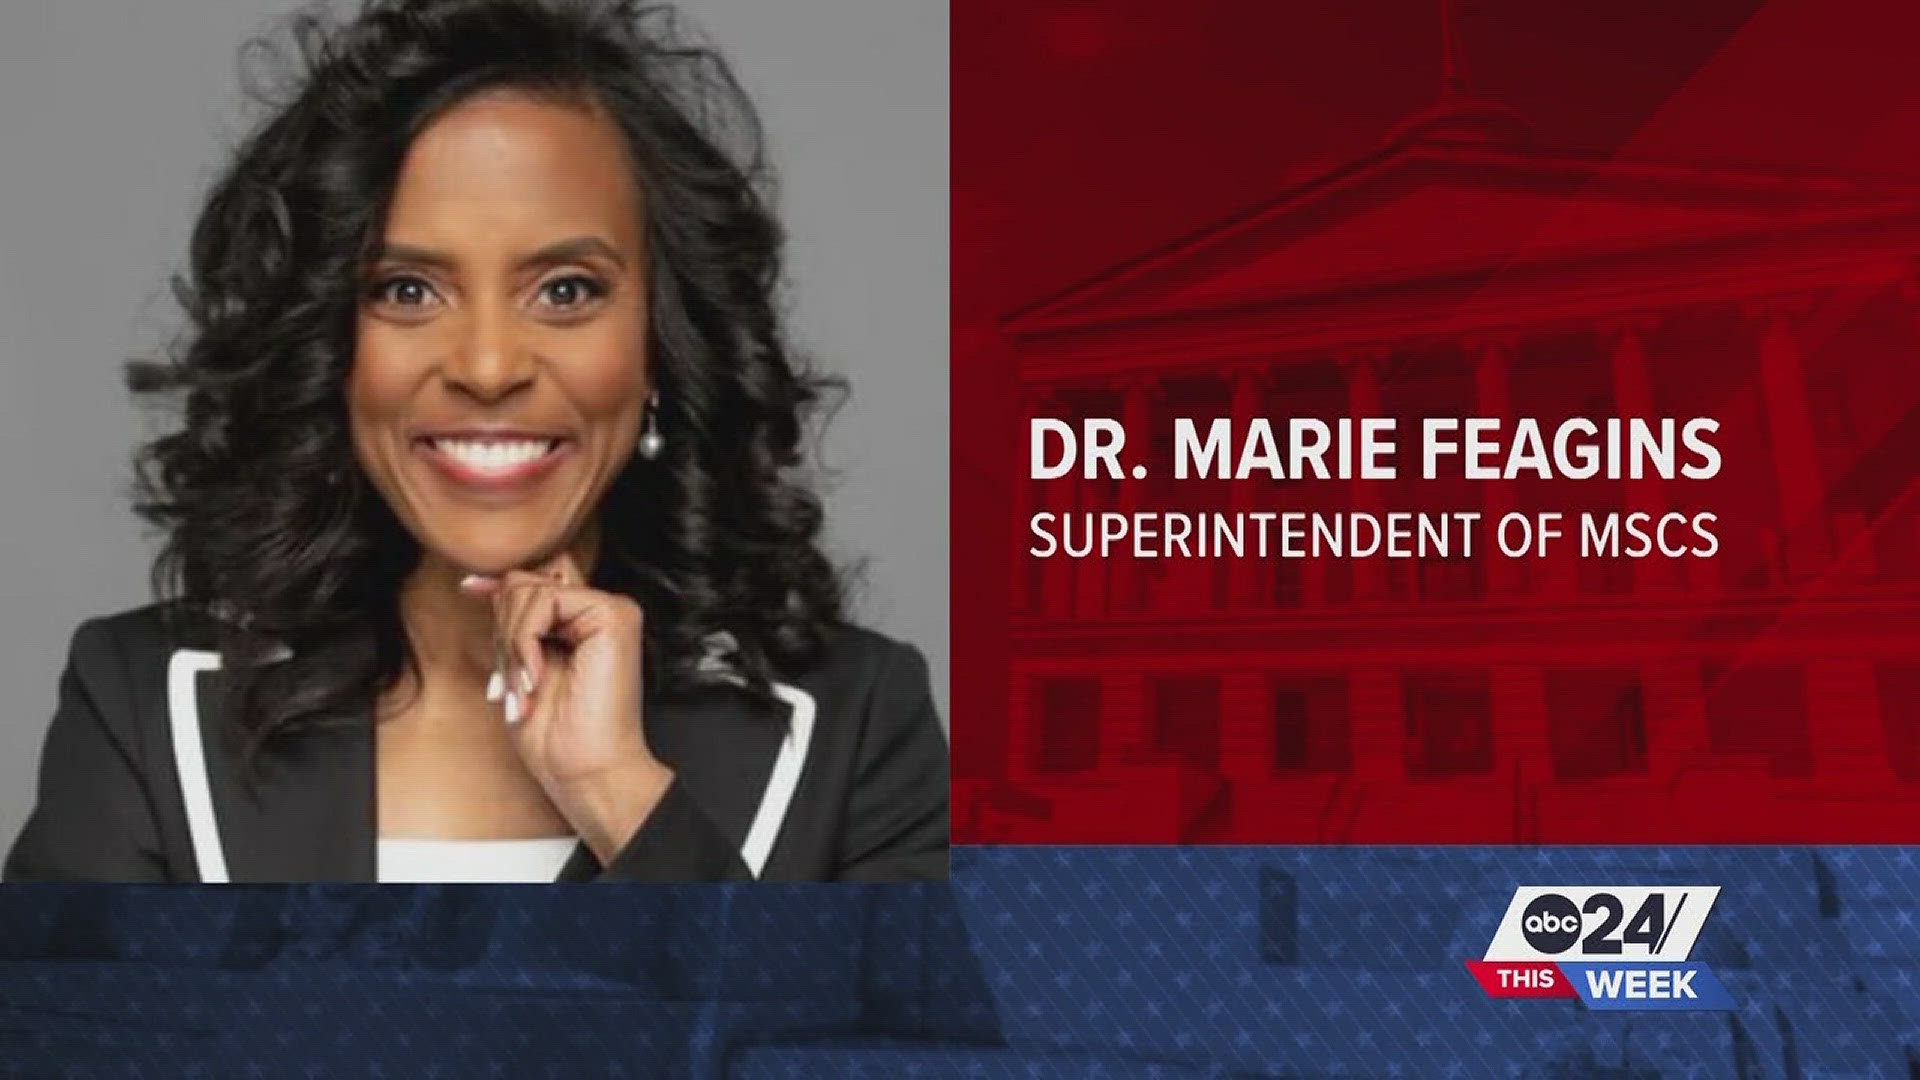 Though the ABC24 This Week panel admits they can be skeptics, the new MSCS superintendent is coming across to them as "no-nonsense" and "forthright."